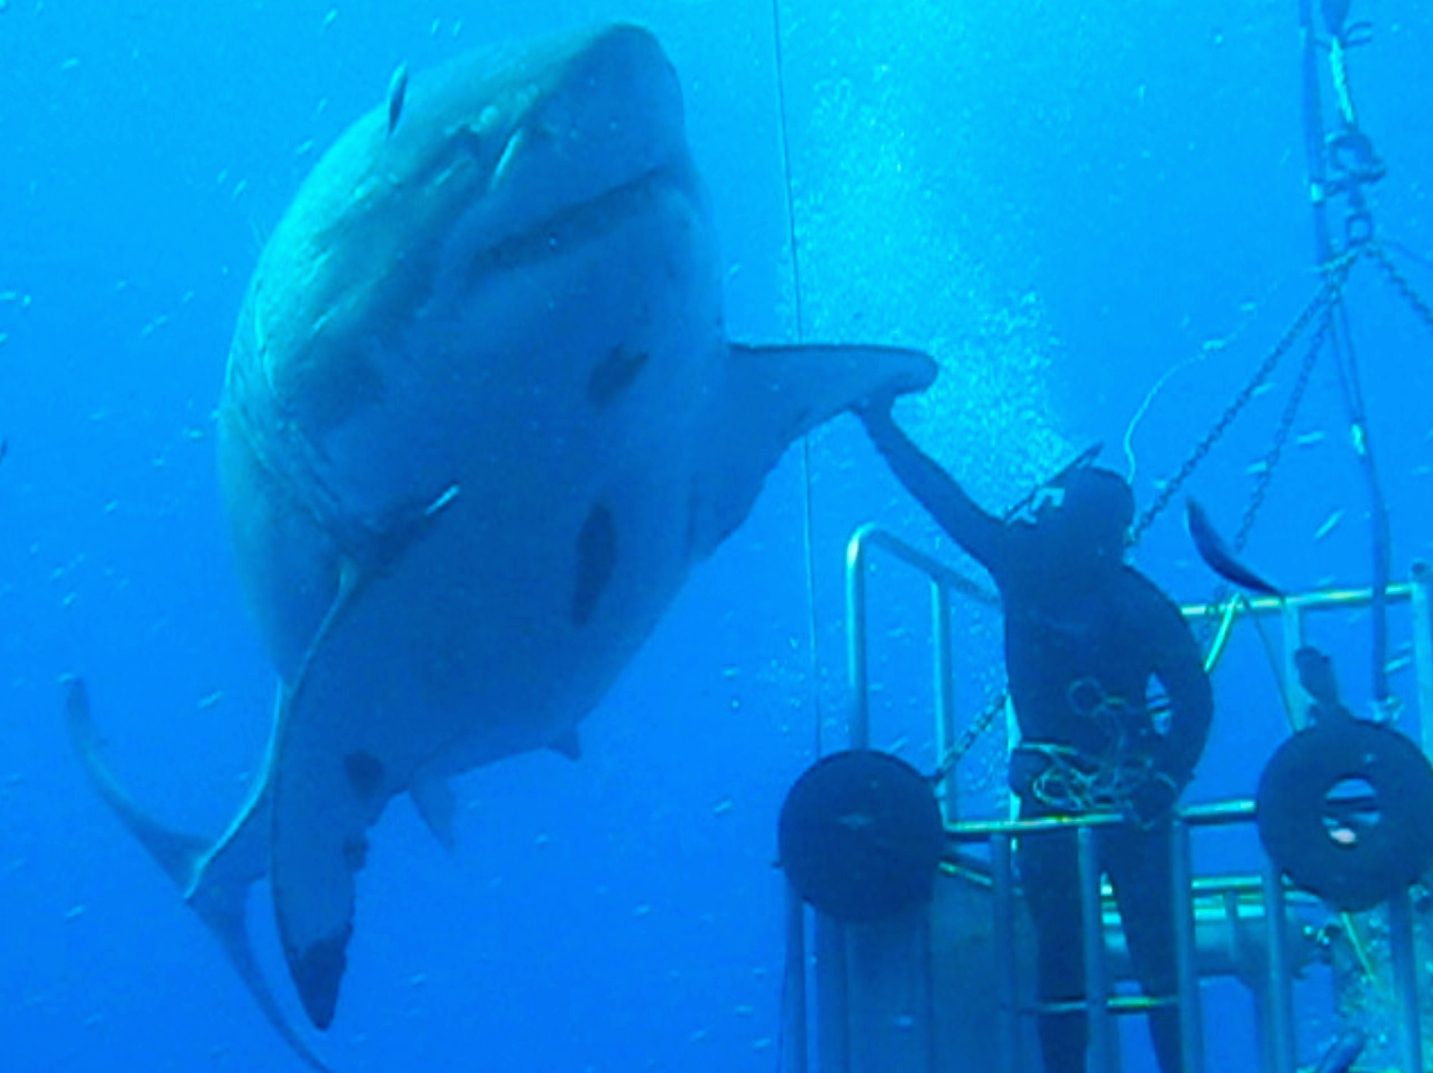 Famous great white shark known as "Deep Blue" and a diver in 2013.